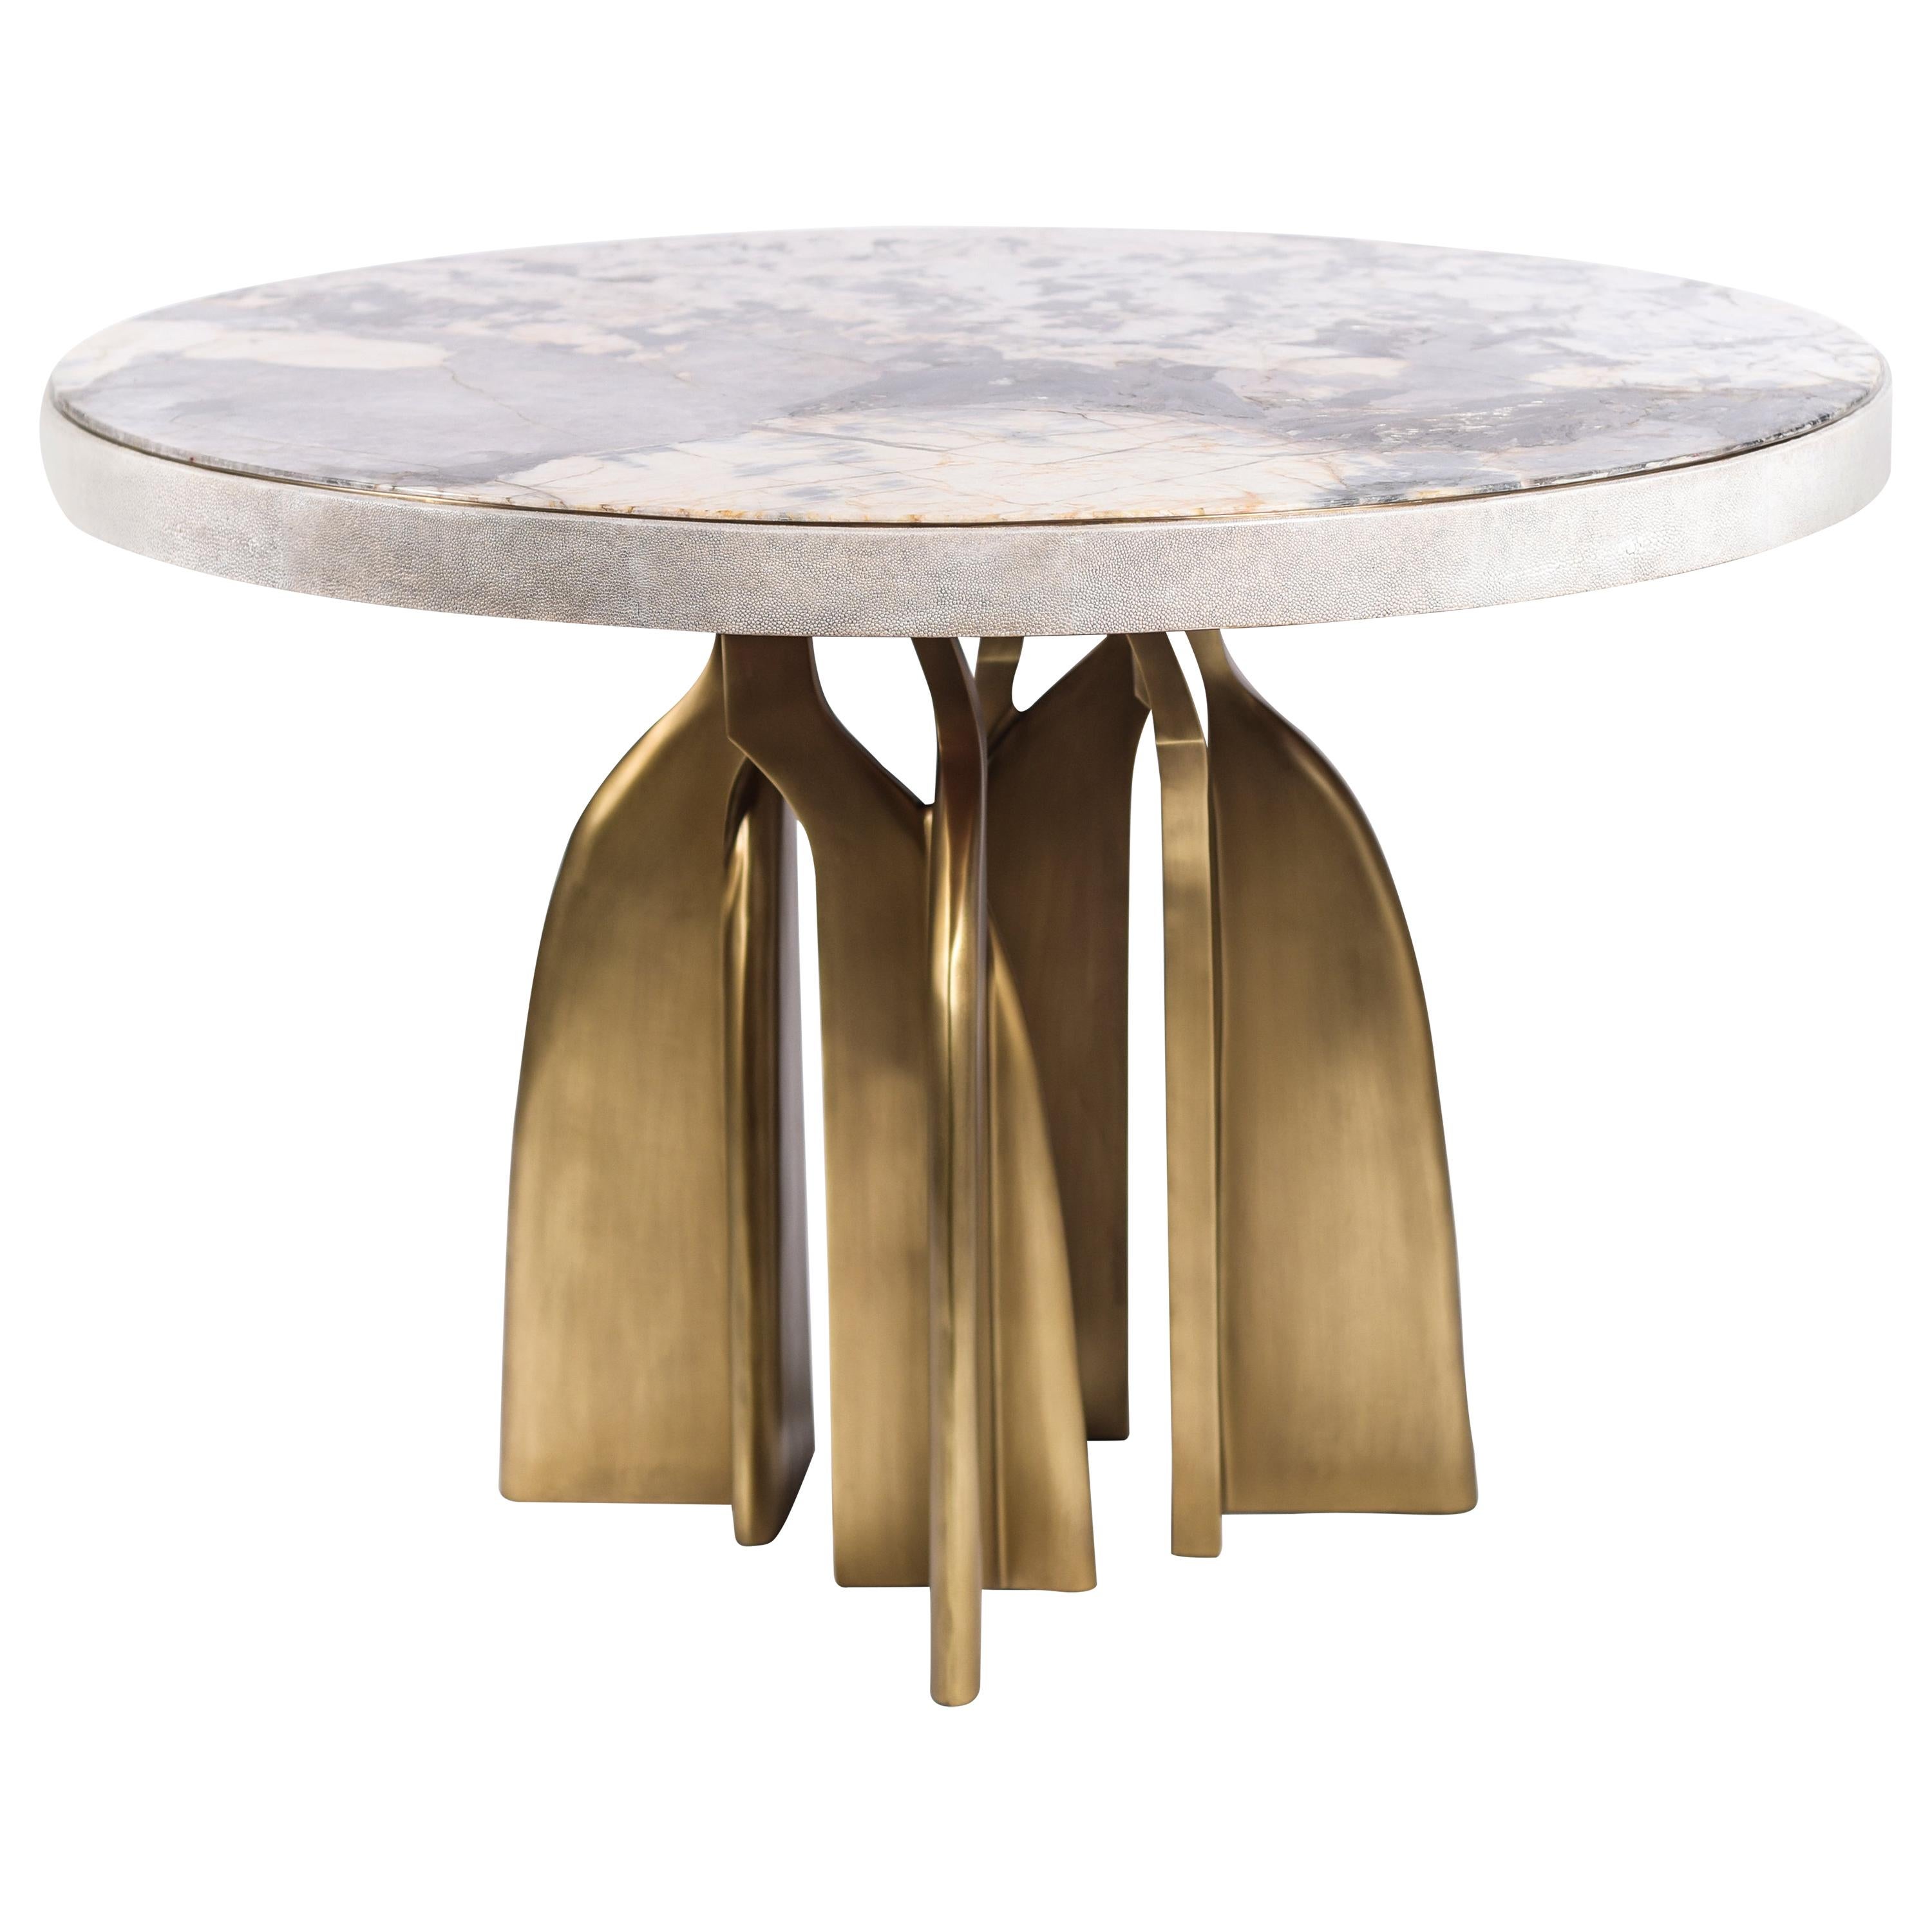 "Chital" Breakfast Table in Cream Shagreen, Patagonia and Brass by Kifu, Paris